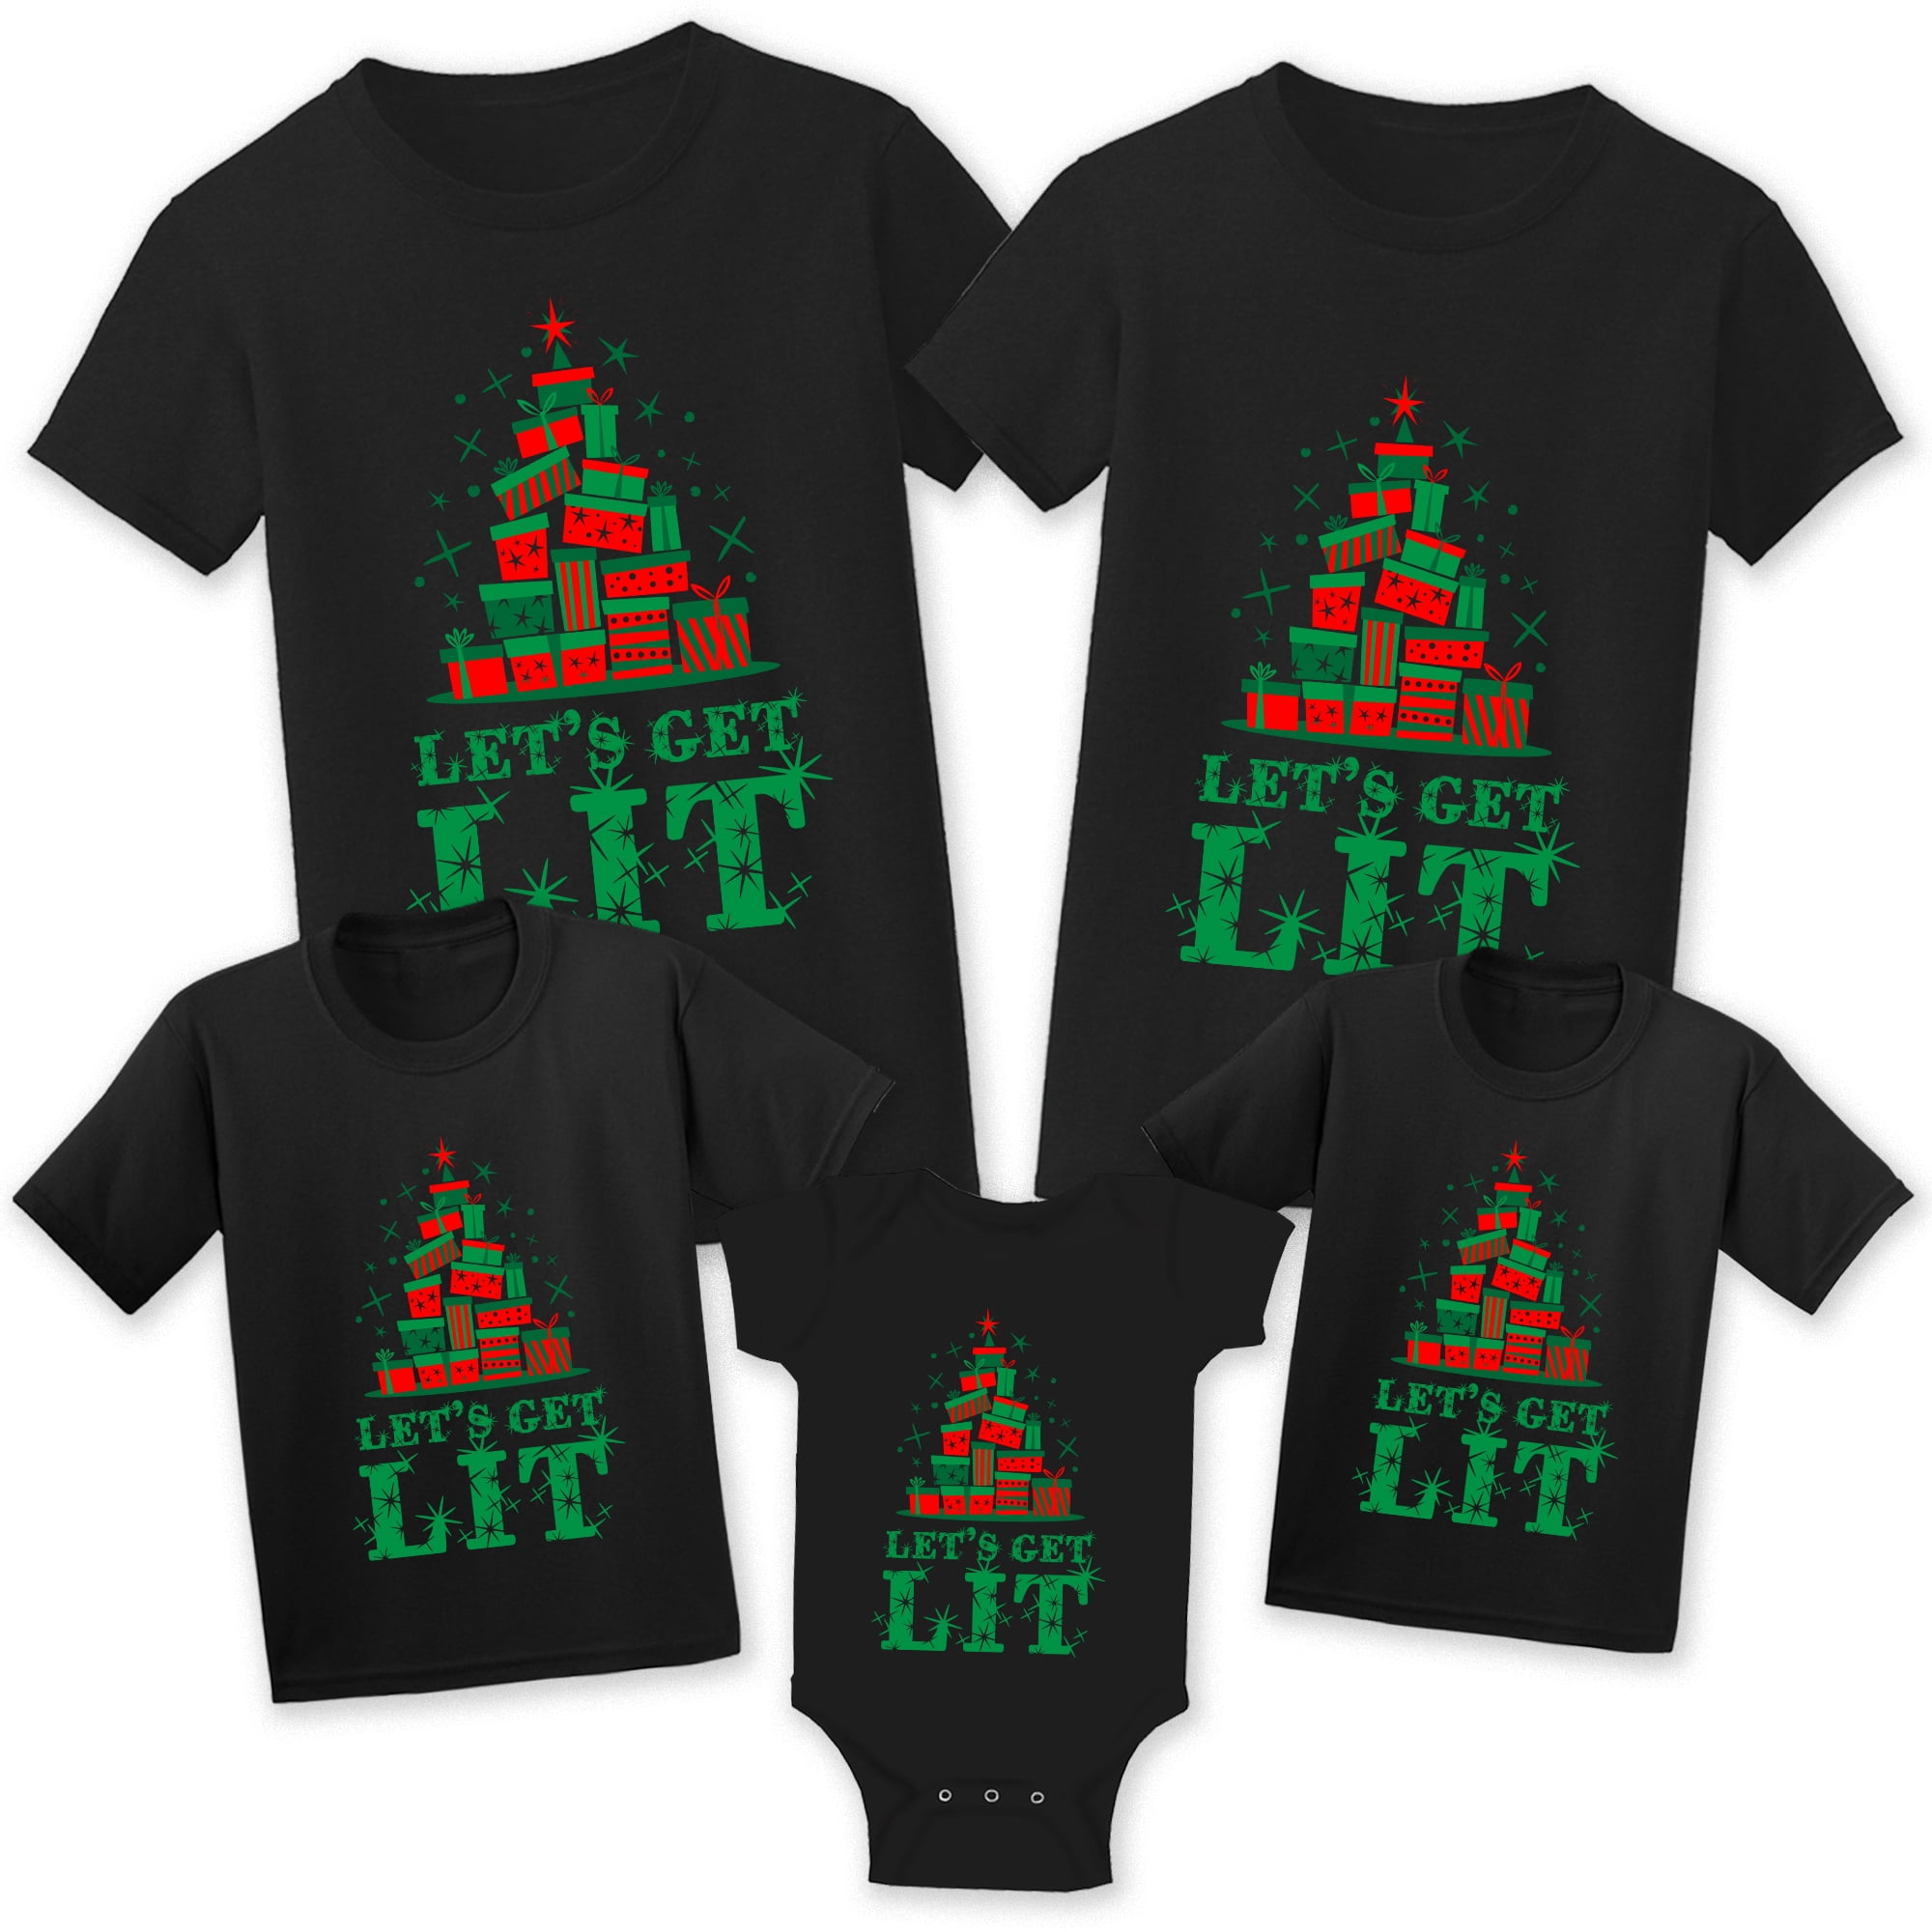 Christmas Tree with Star on Top and Gifts Underneath Kids Boy Girl T-Shirt 